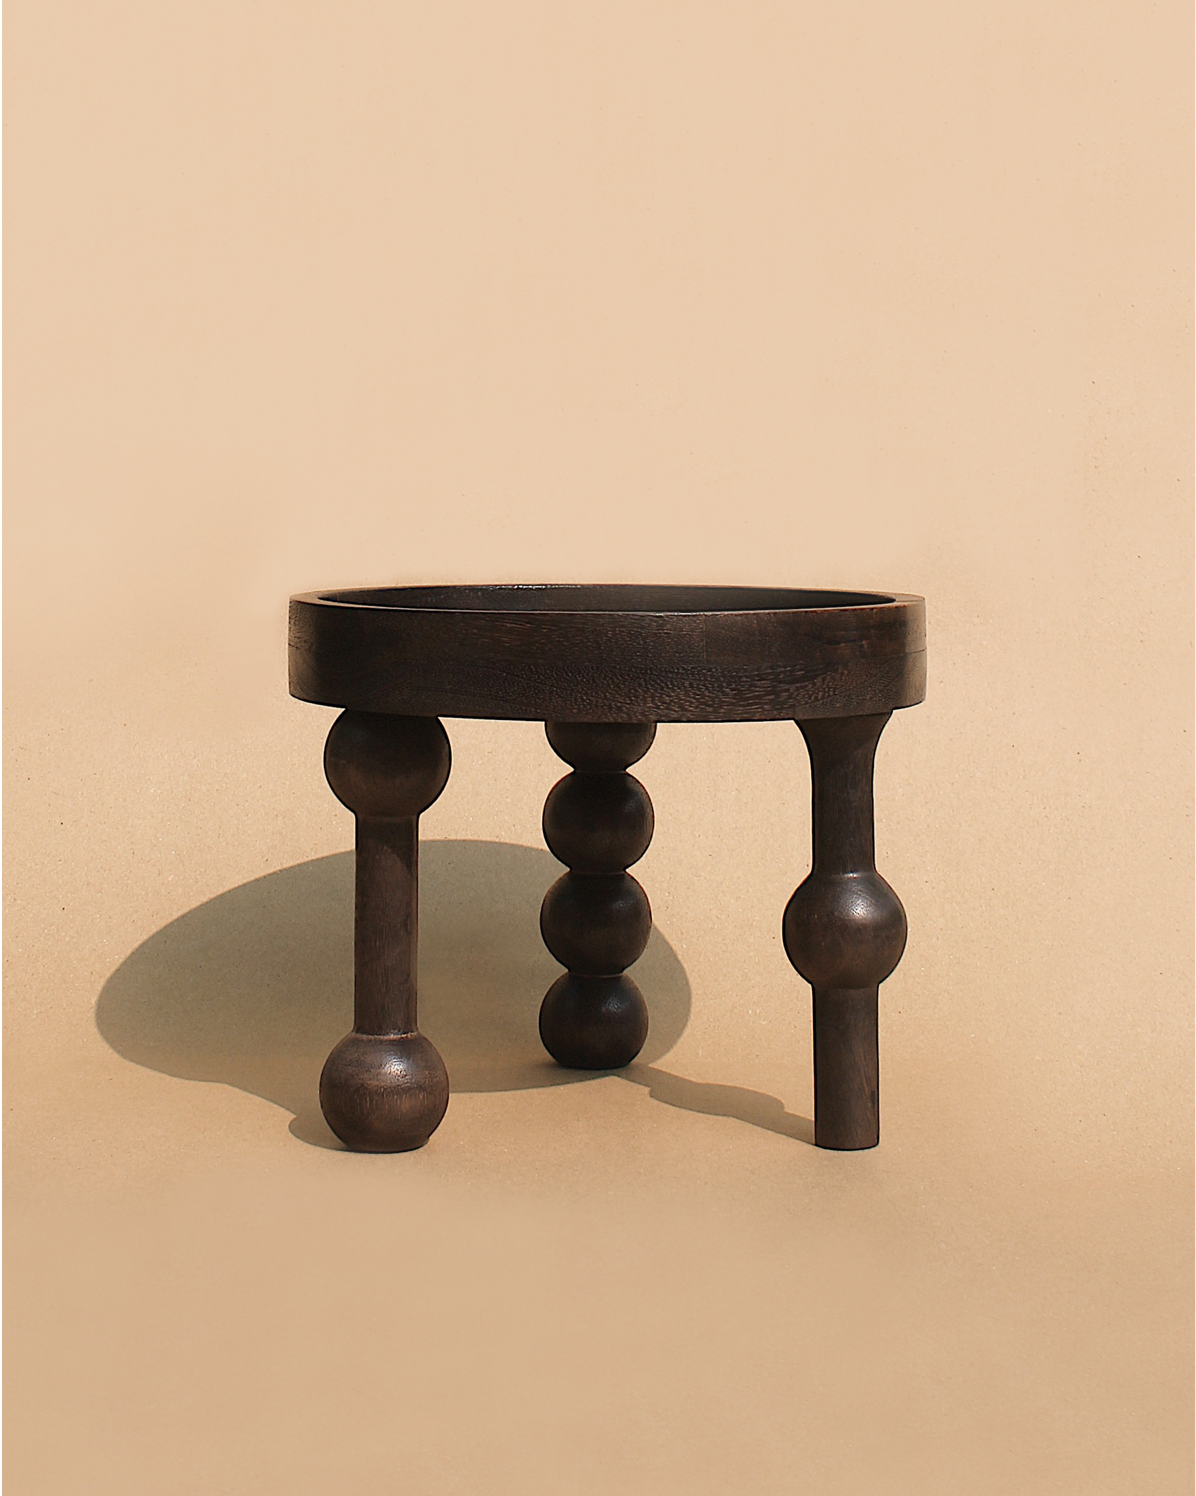 Wooden stool as a decor object